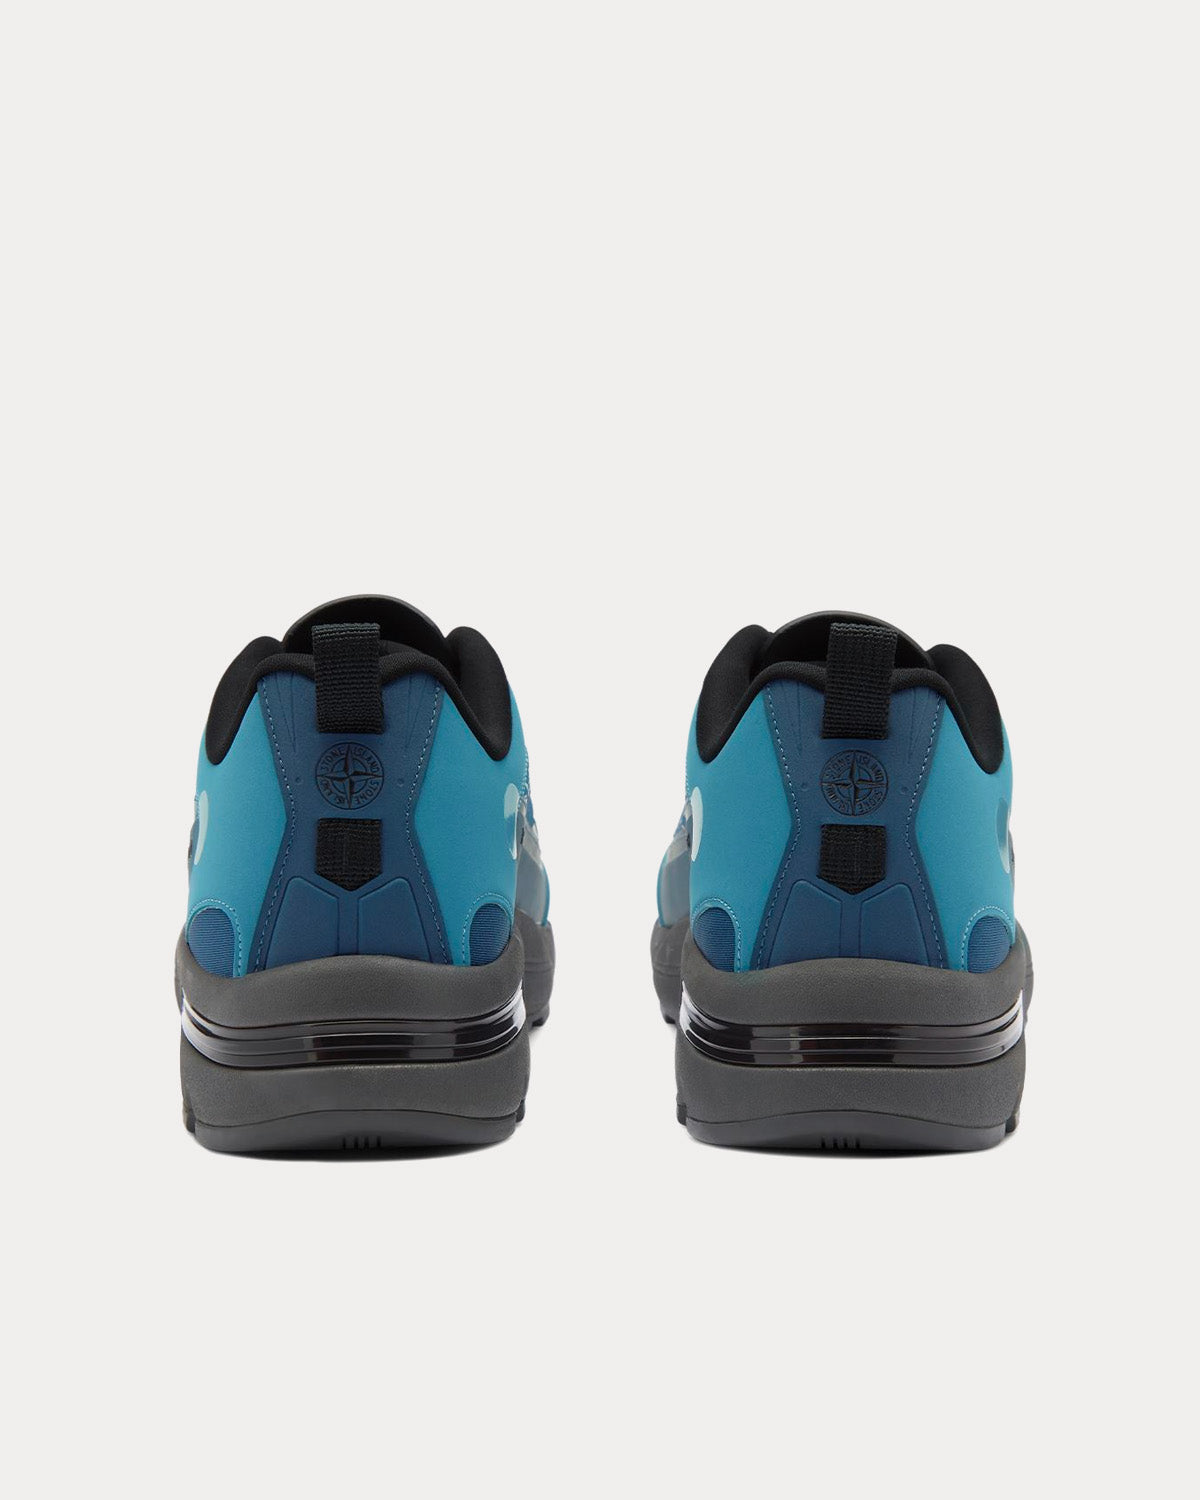 Stone Island - S0303 Turquoise Low Top Sneakers